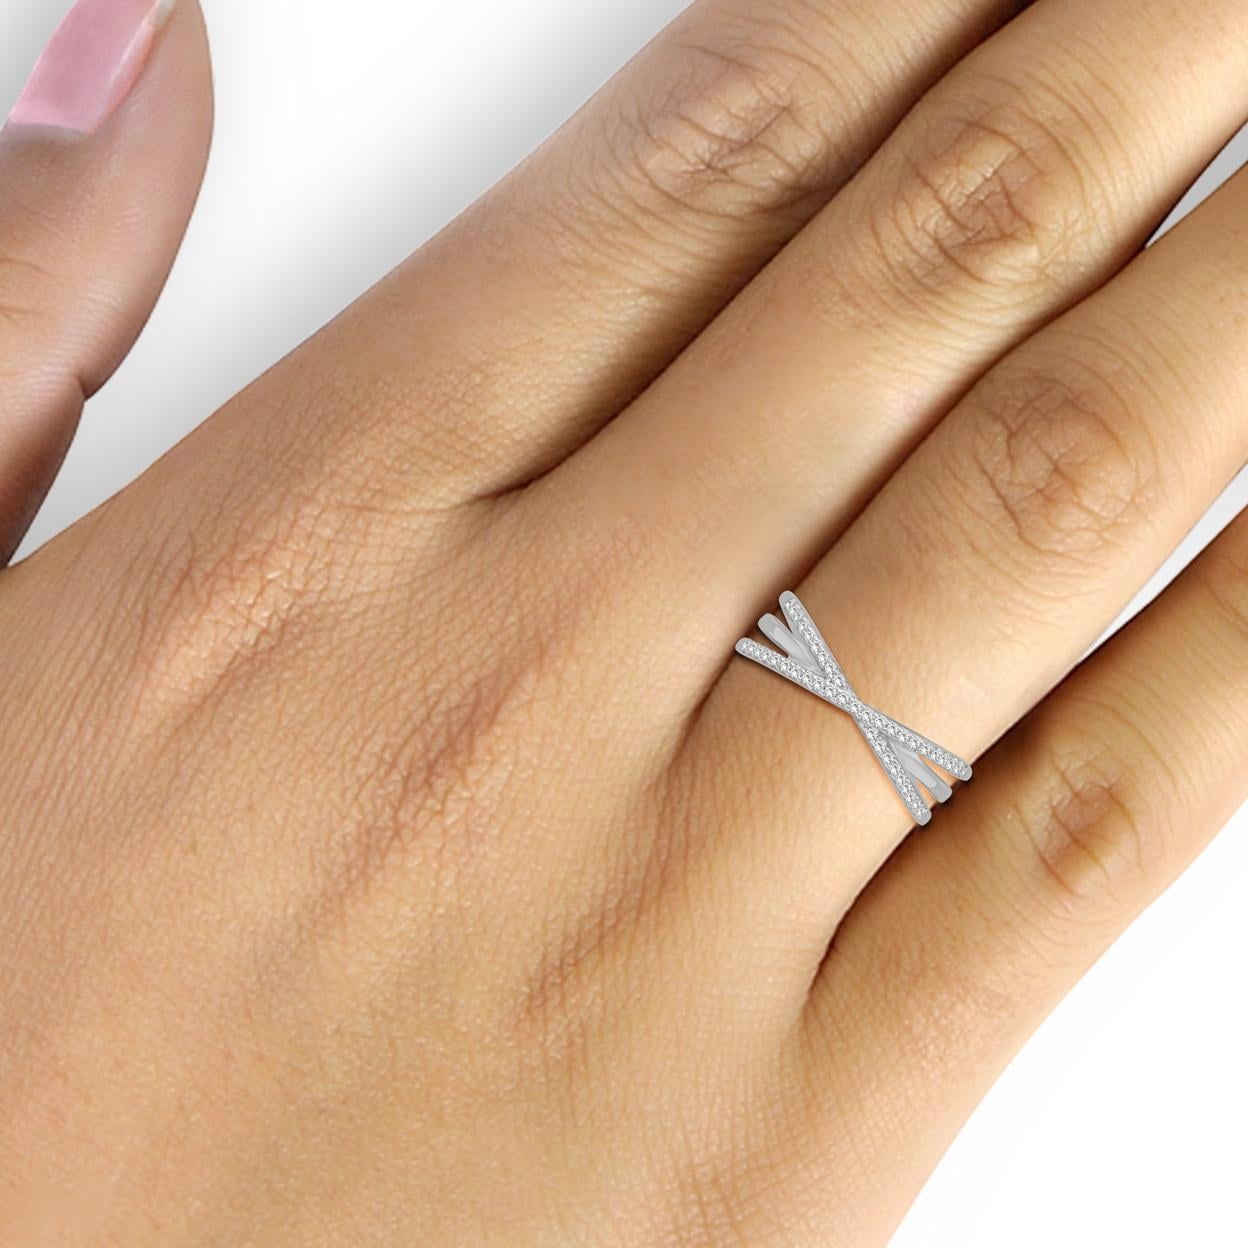 10 Steal-worthy Solitaire Engagement Rings We Spotted on Real Brides